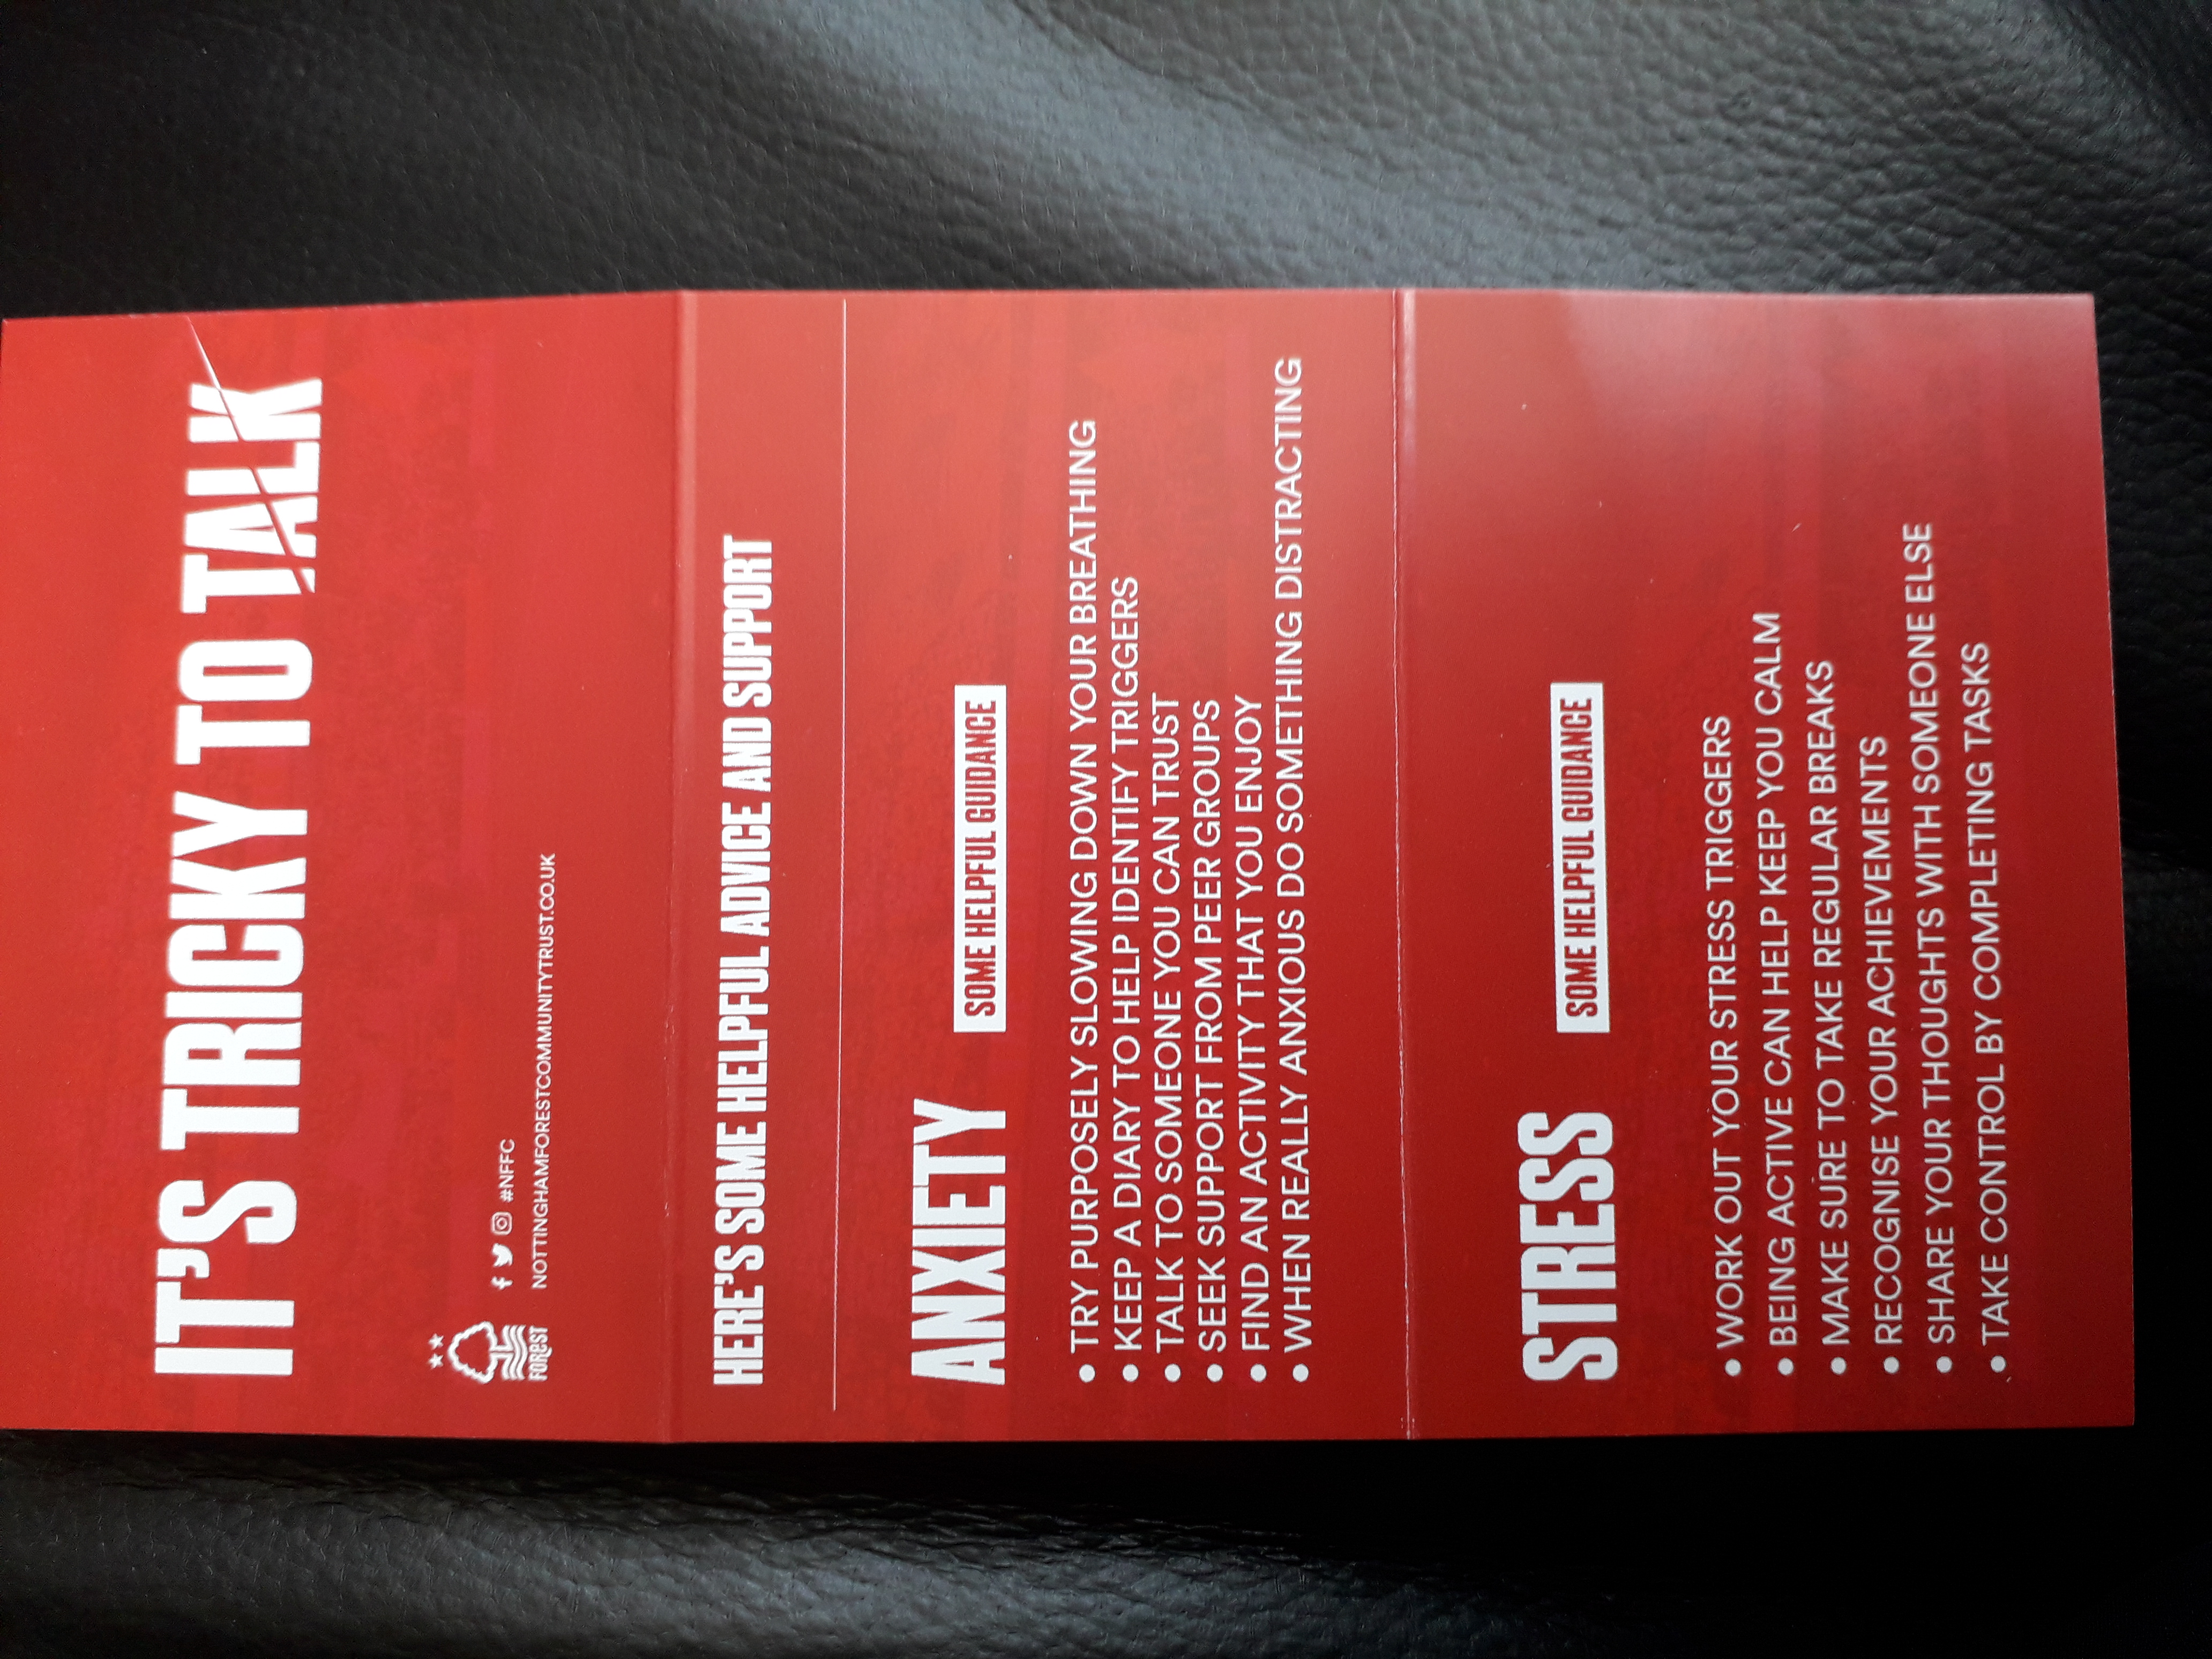 Came with my season card - What are they trying to say ???